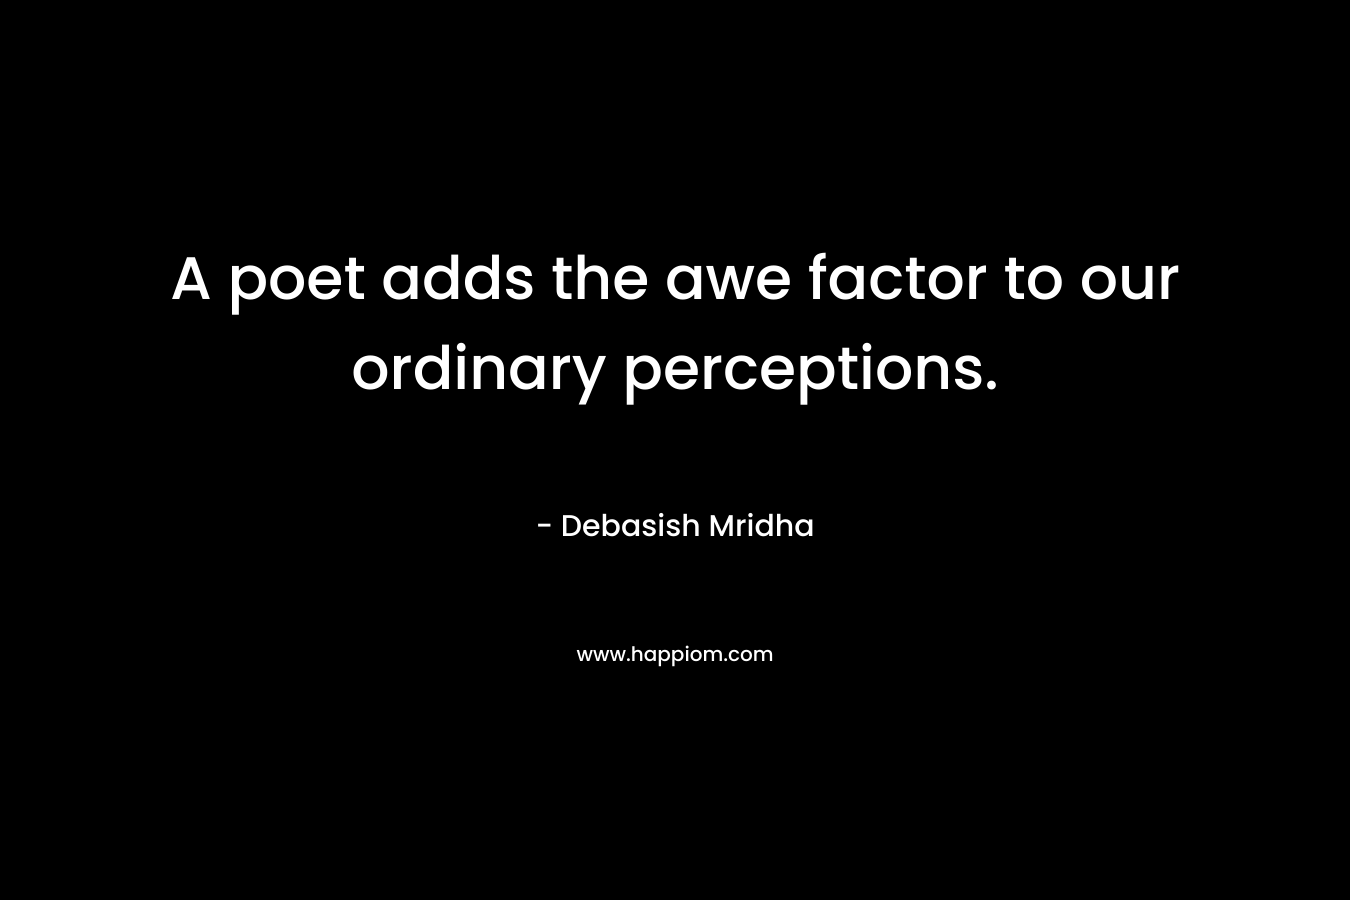 A poet adds the awe factor to our ordinary perceptions. – Debasish Mridha